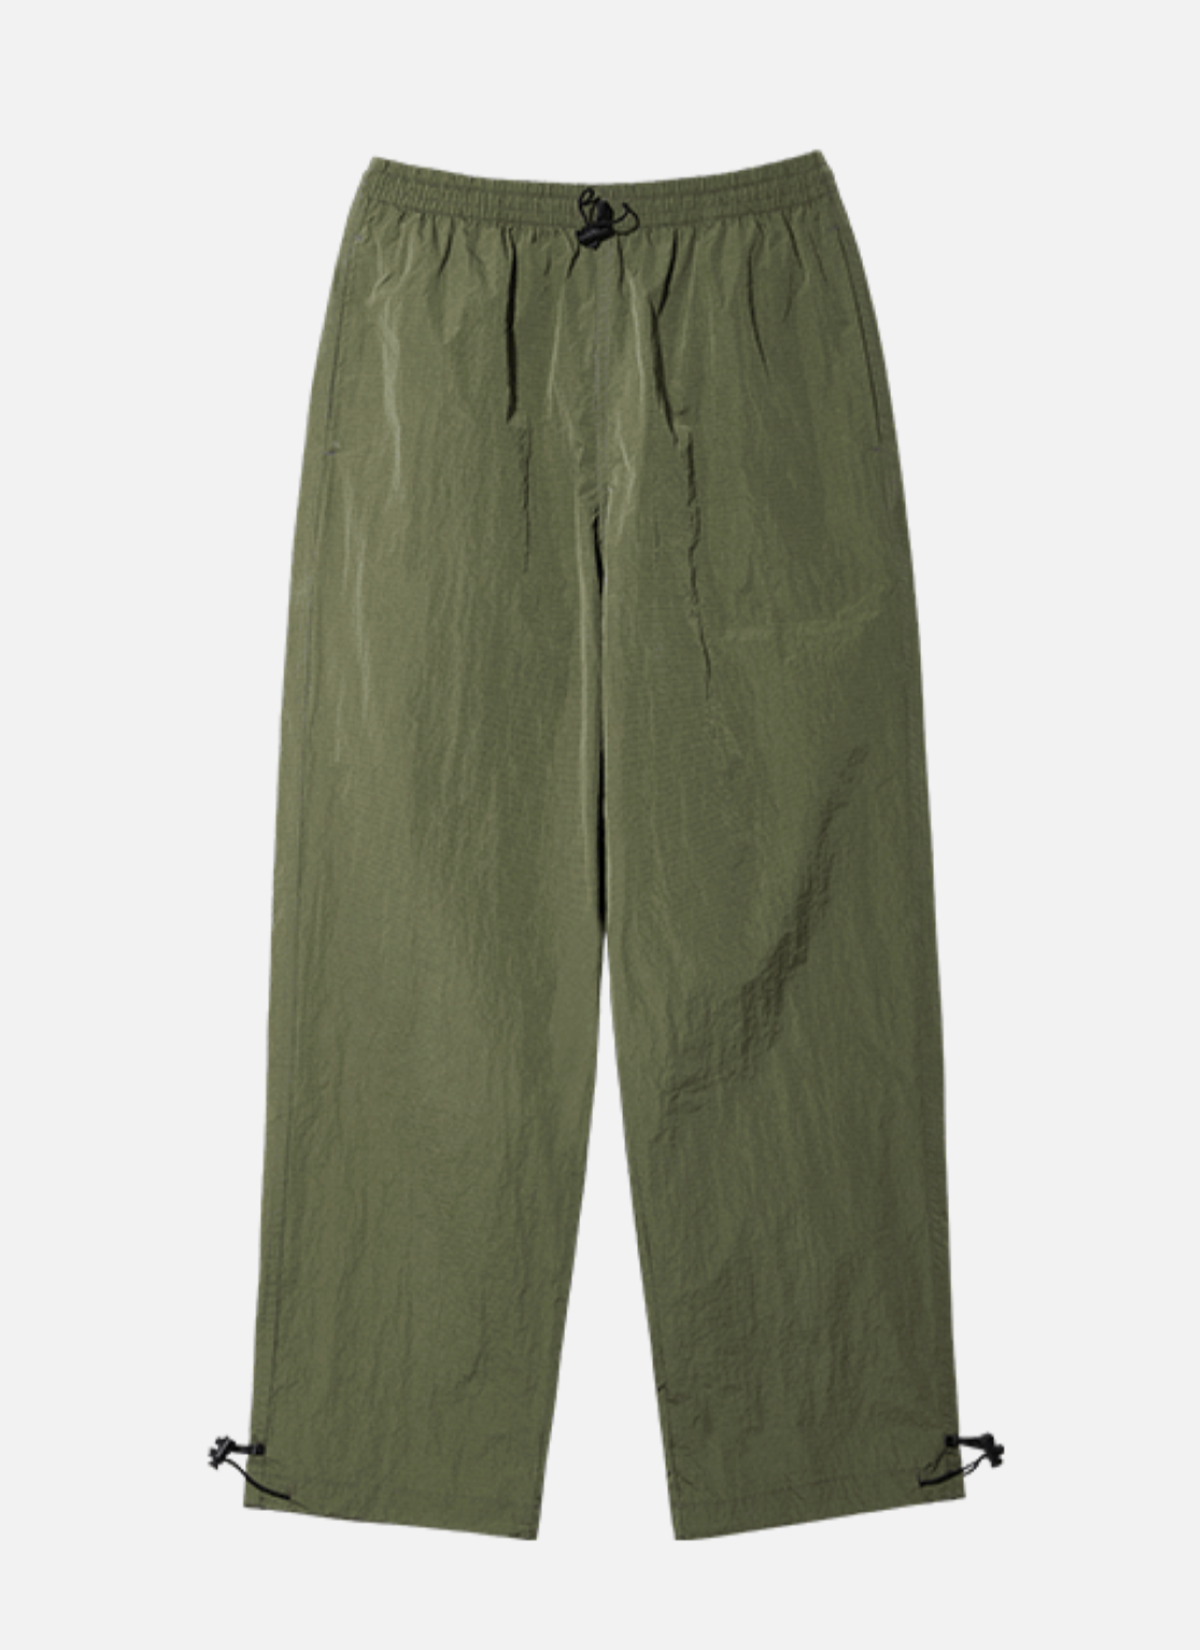 Rocky Pants Ripstop Olive Green